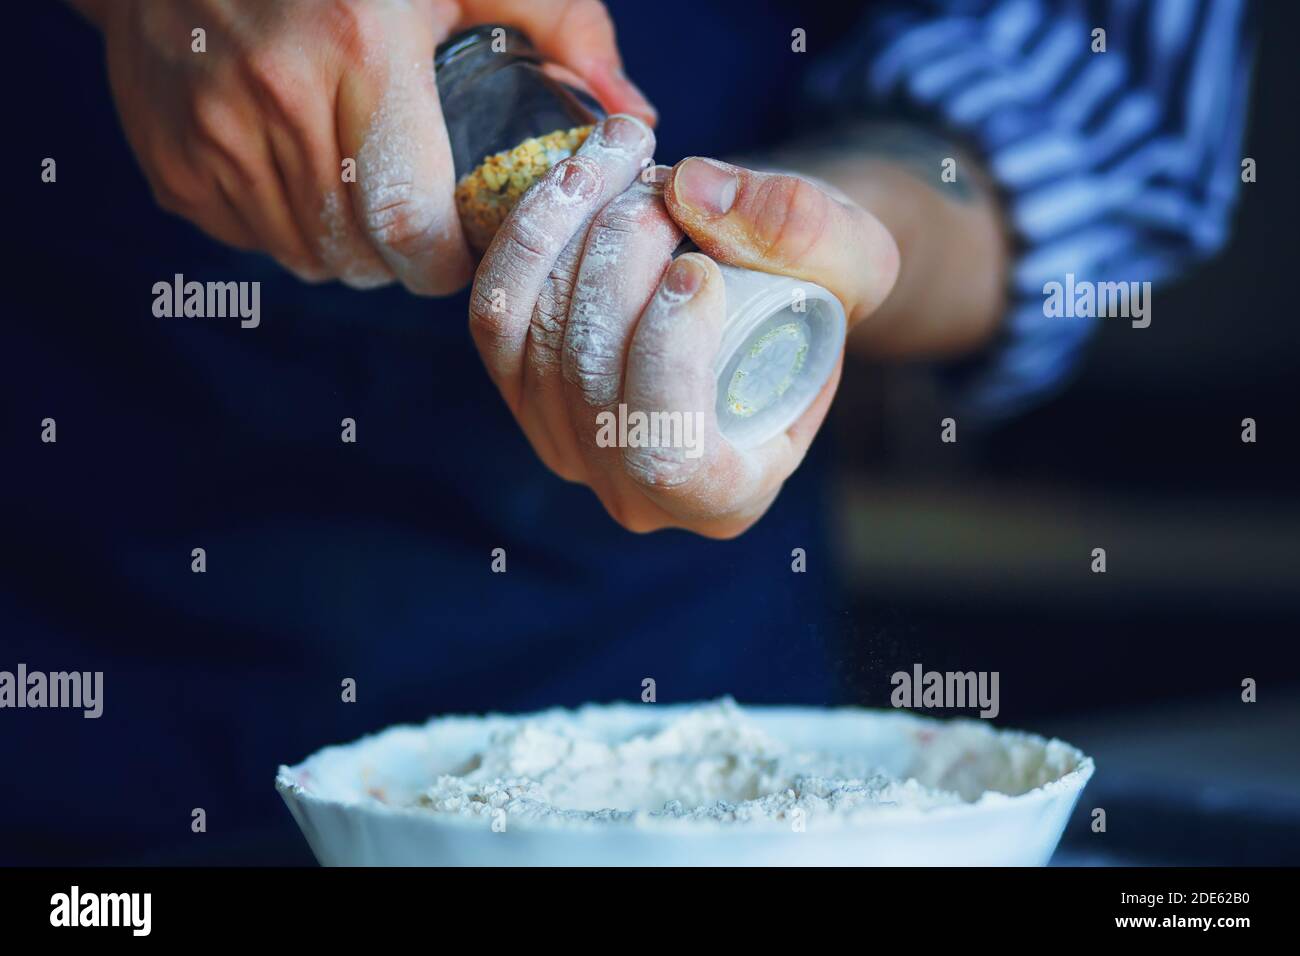 A chef in a blue apron and striped shirt holds a glass salt shaker with seasoning and pours it into a bowl of flour for future baking. Home cooking. Stock Photo